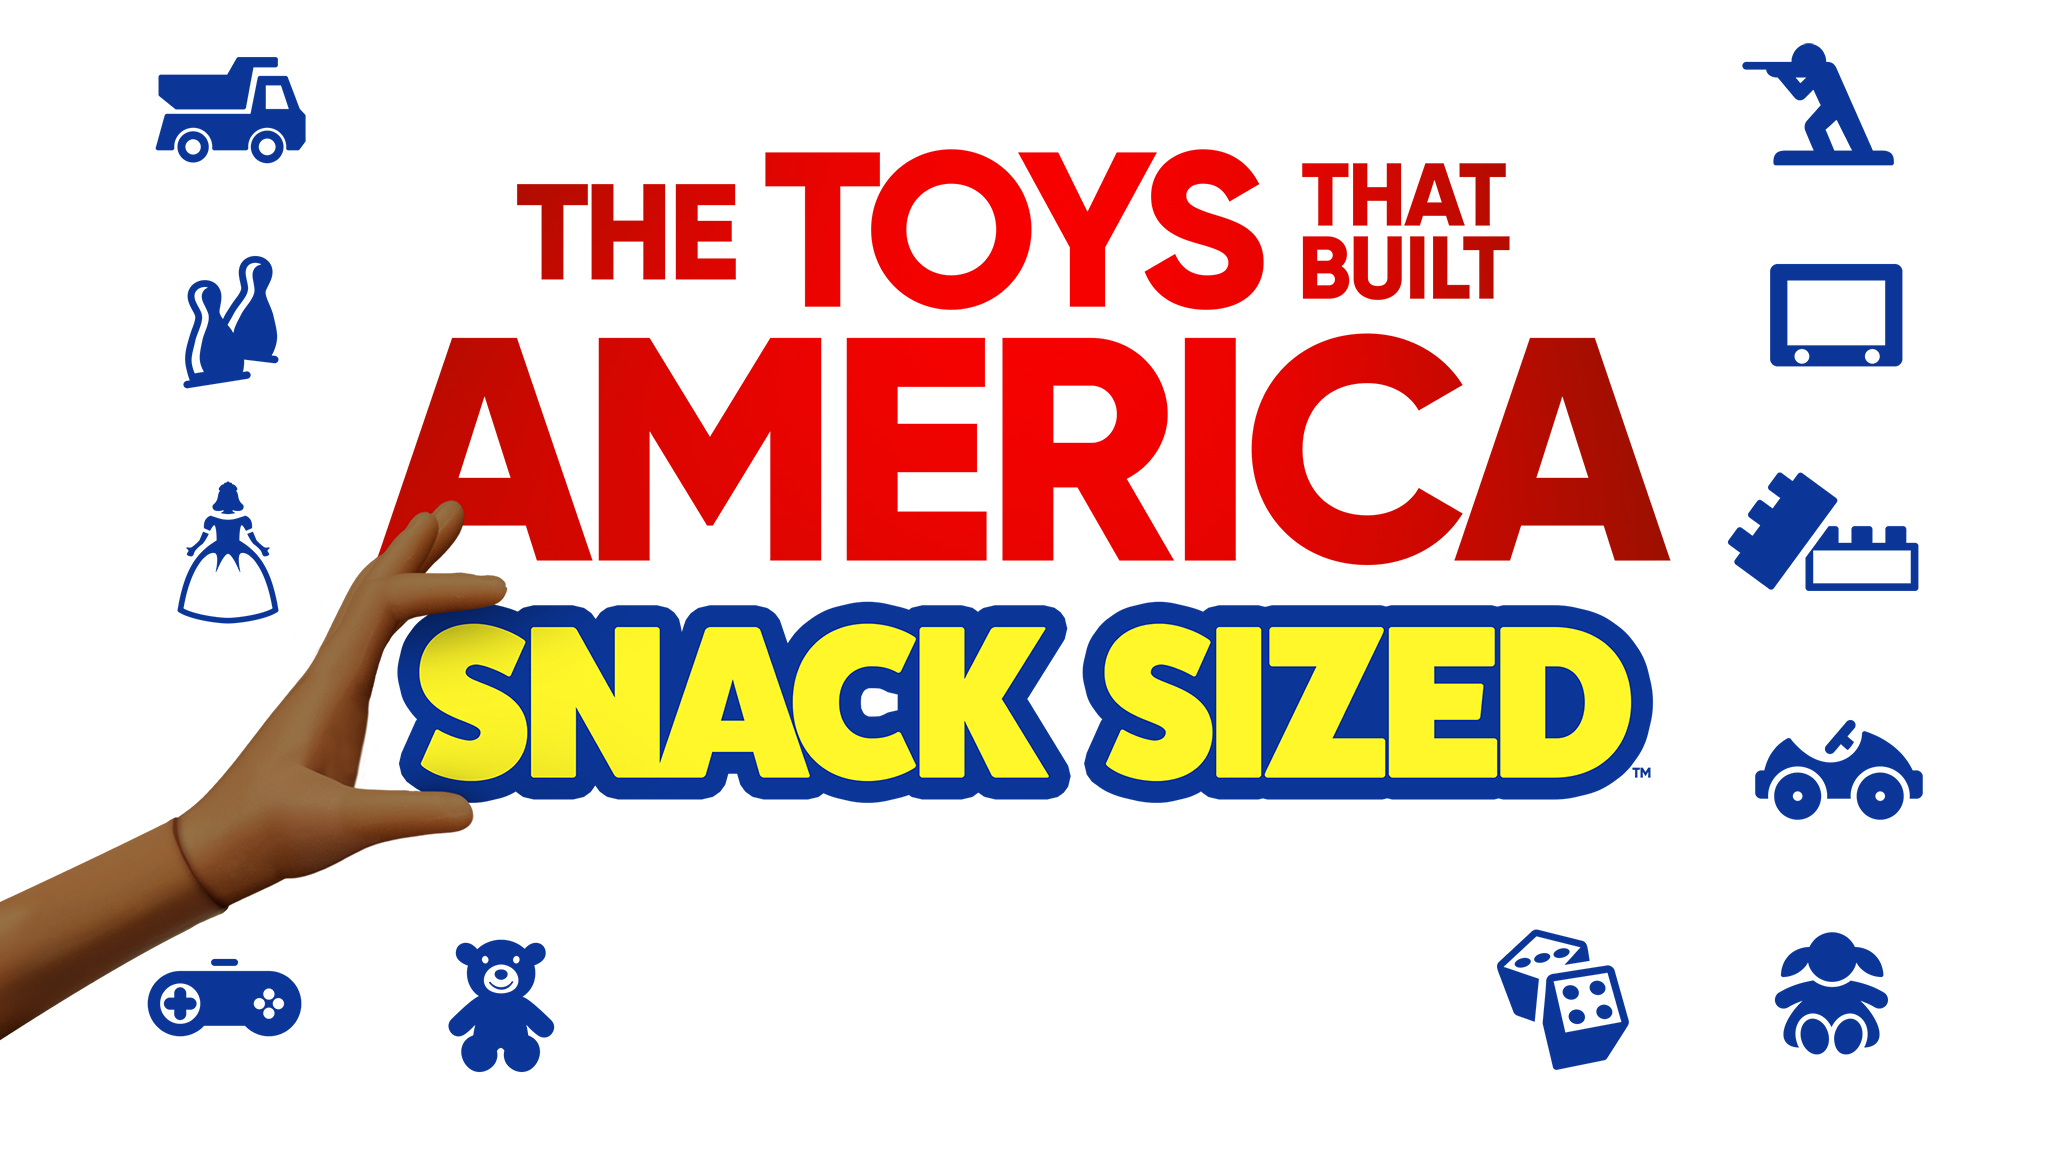 The Toys That Built America: Snack Sized 2X2